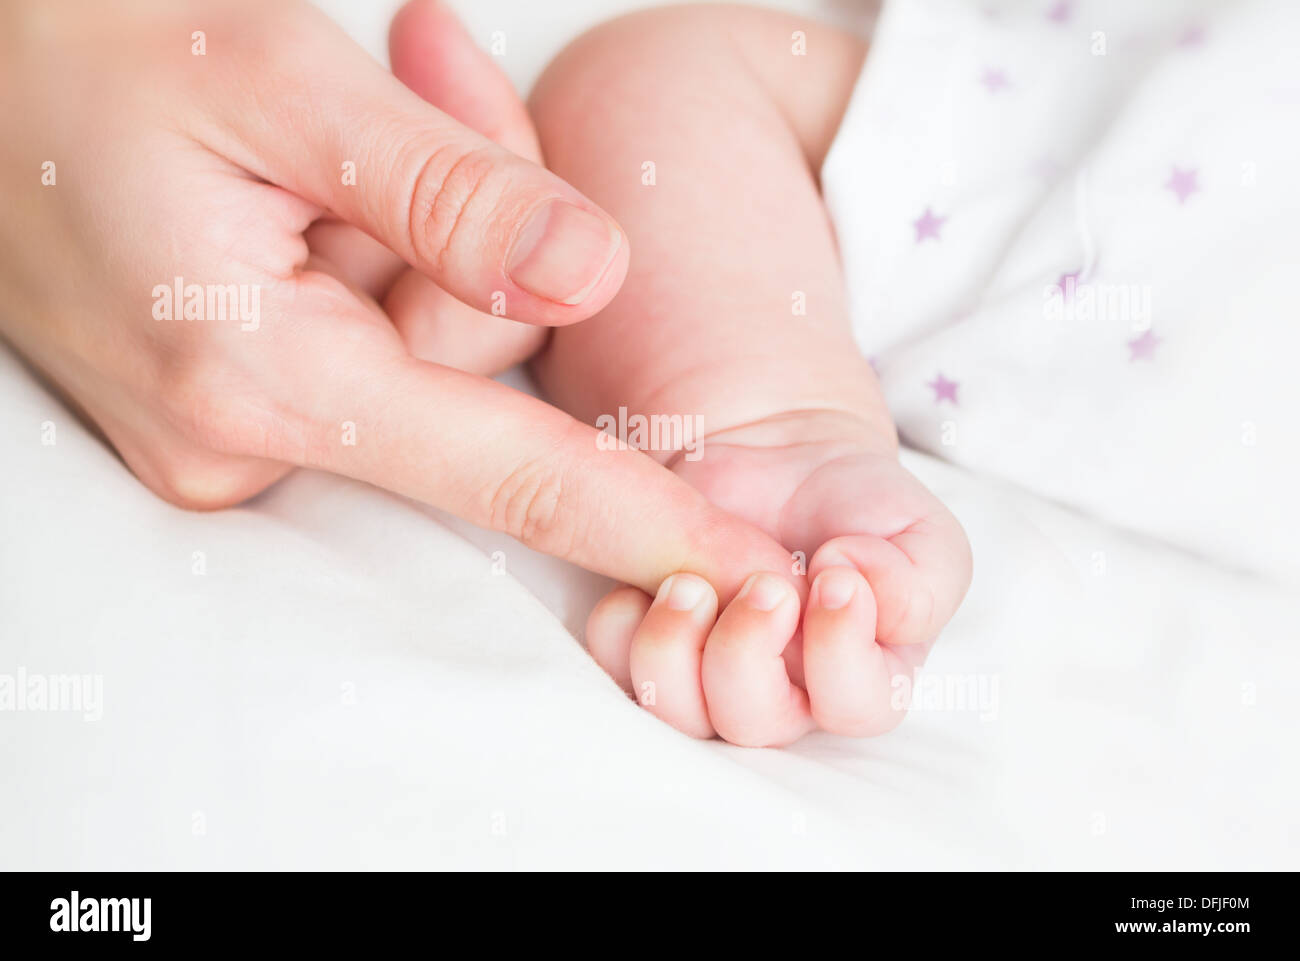 https://c8.alamy.com/comp/DFJF0M/baby-holding-the-mothers-finger-DFJF0M.jpg